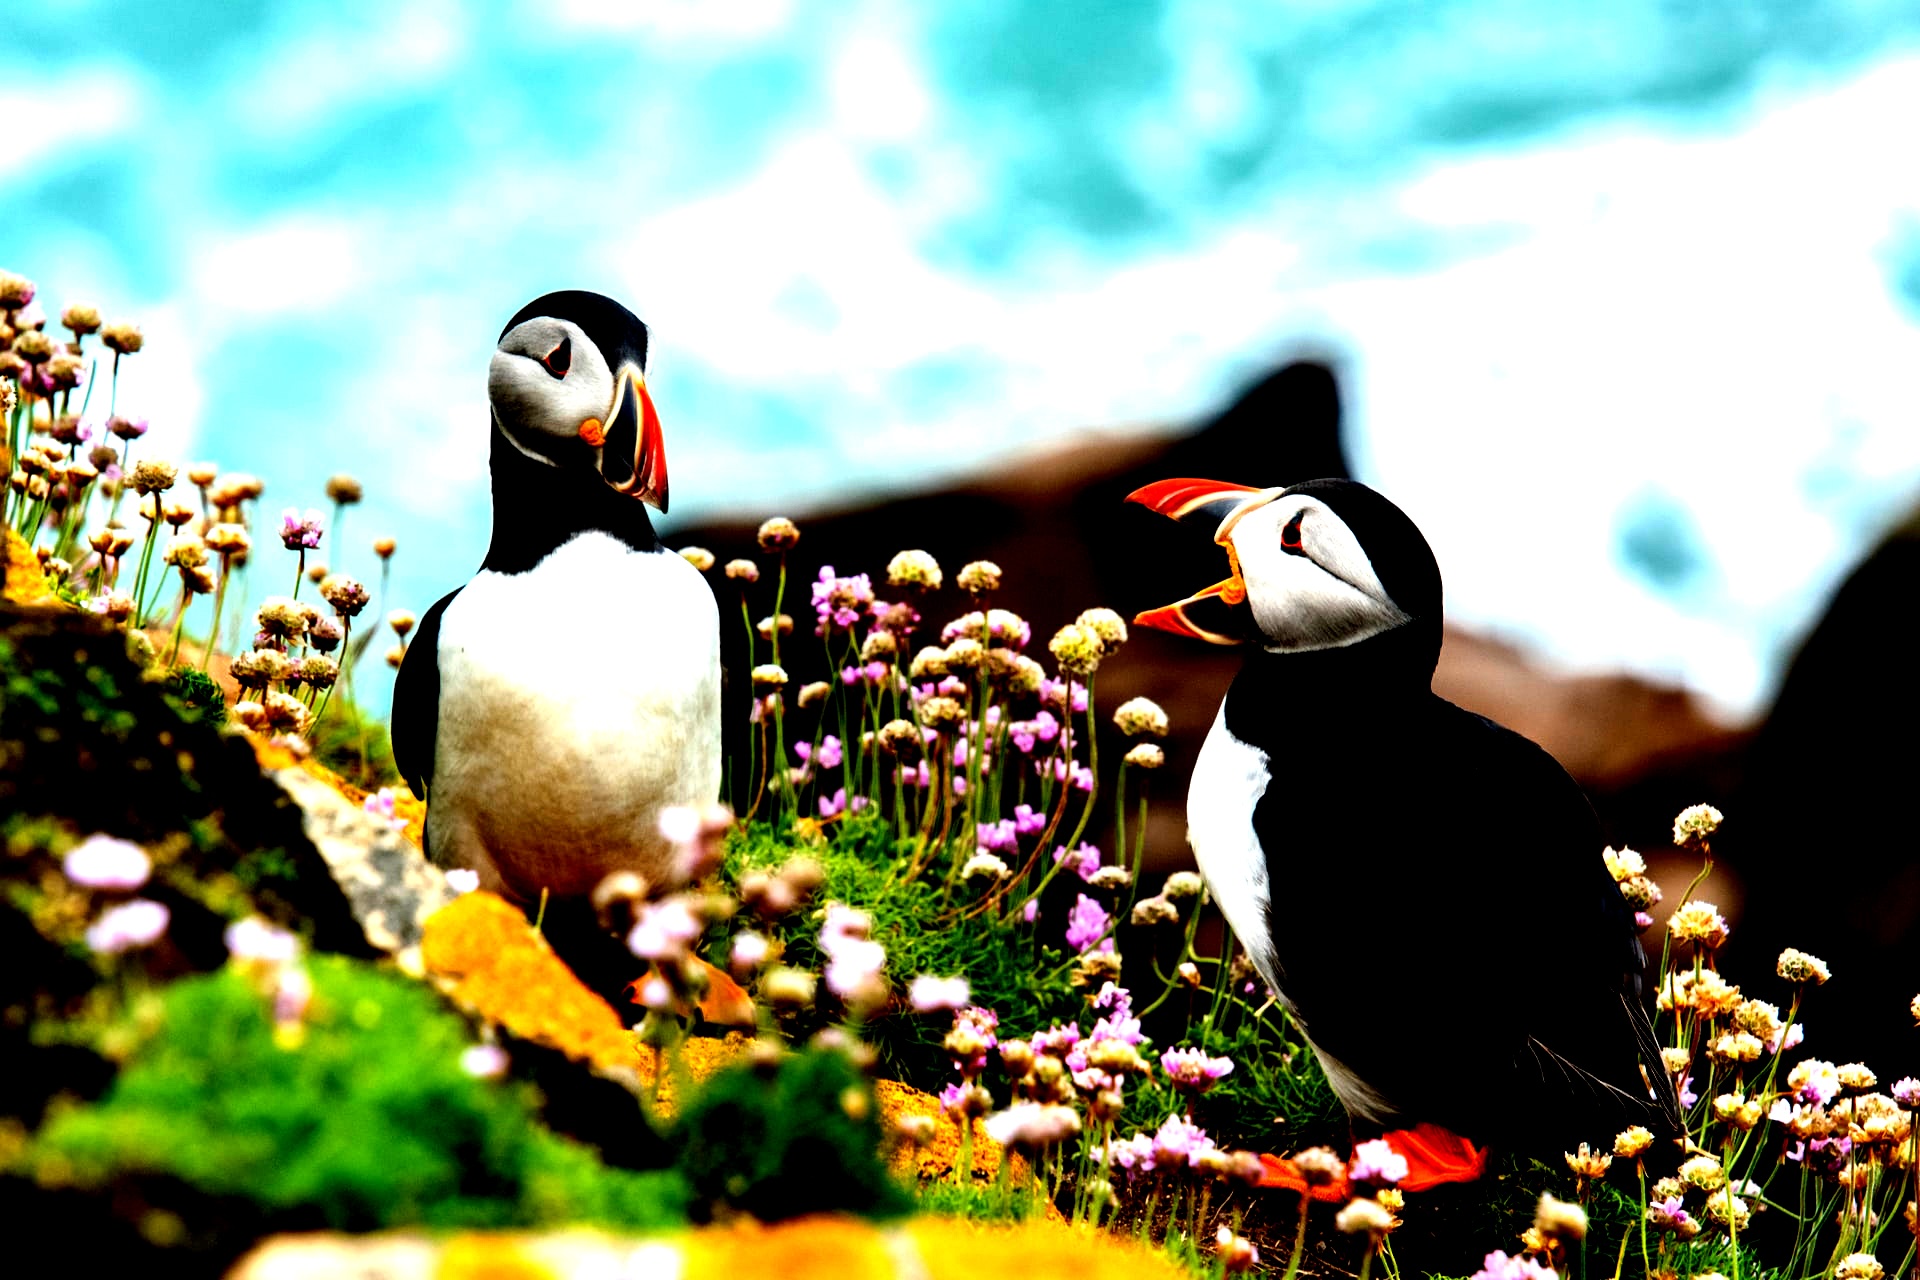 “Puffin” image with enhanced contrast